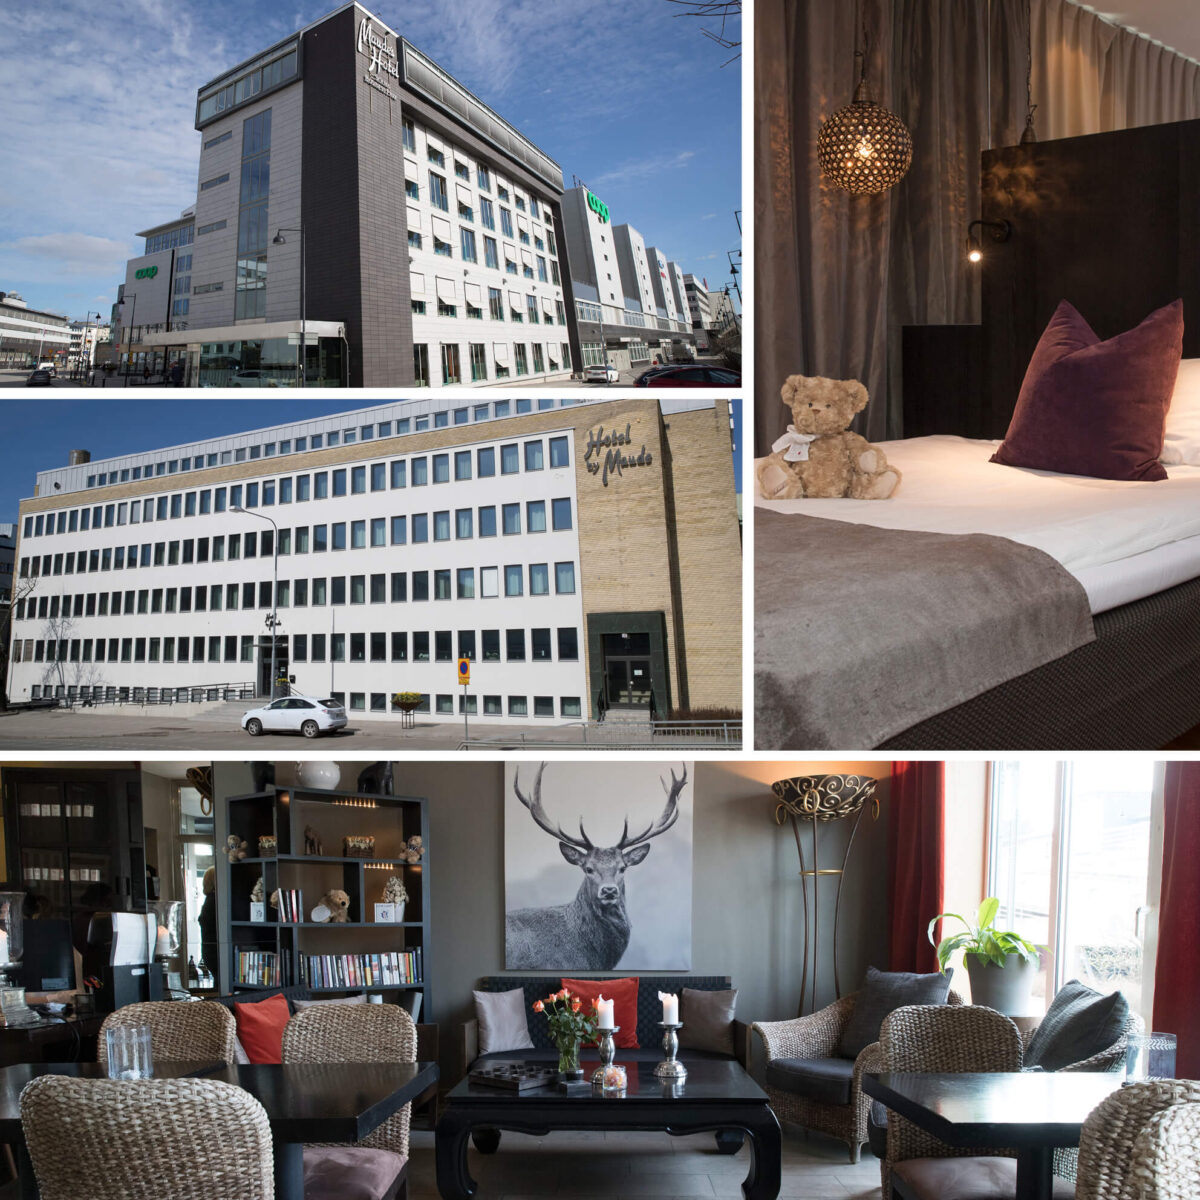 maudes-hotels-in-solna-are-sold-to-cichospitality